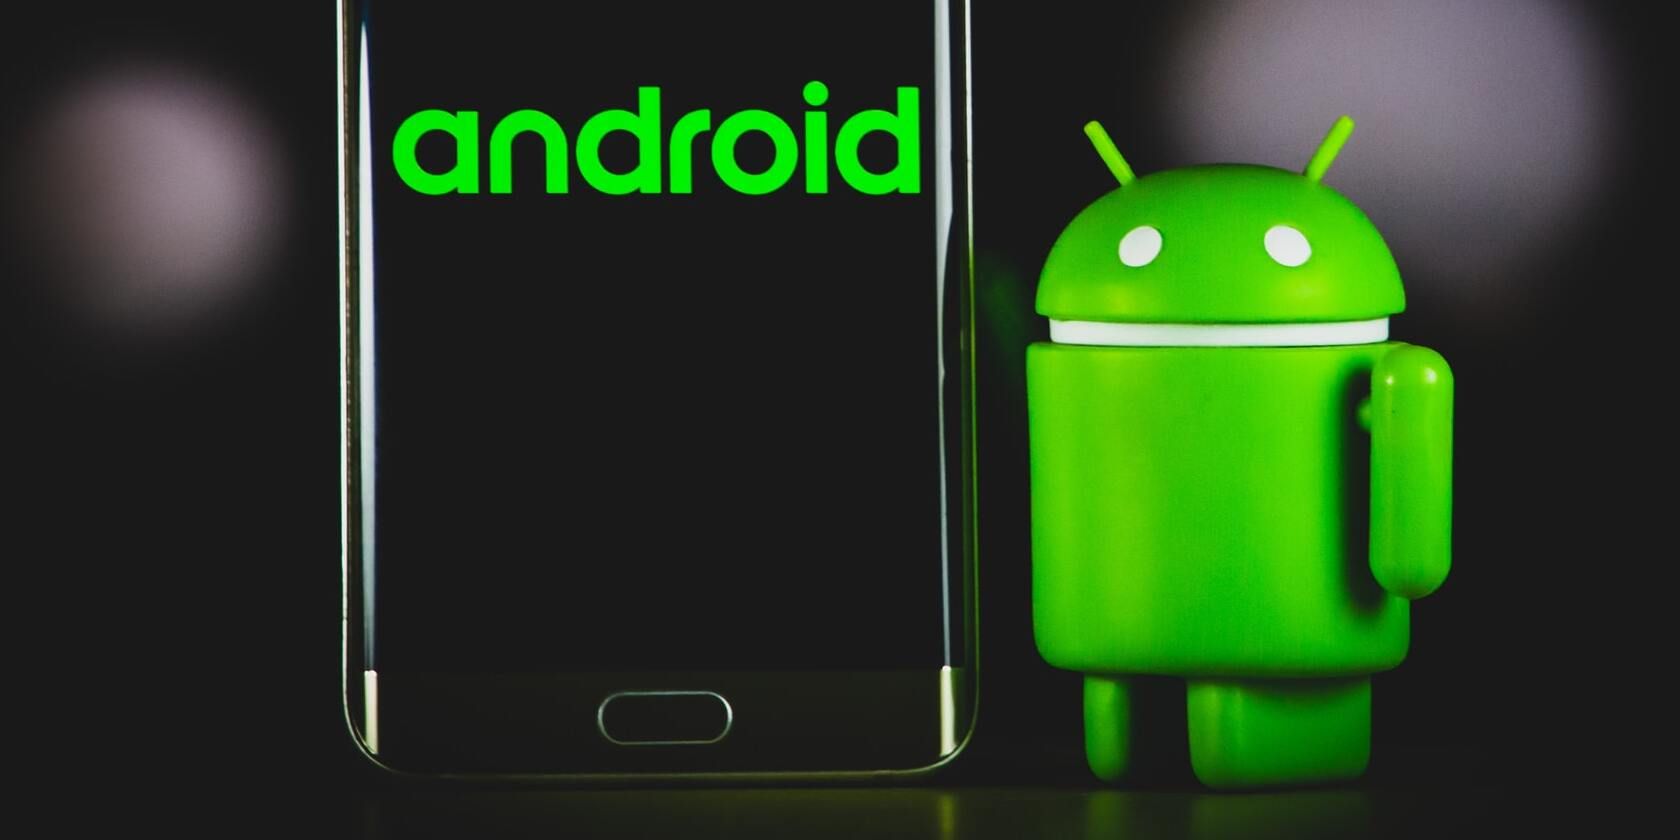 What Is an Android Phone?